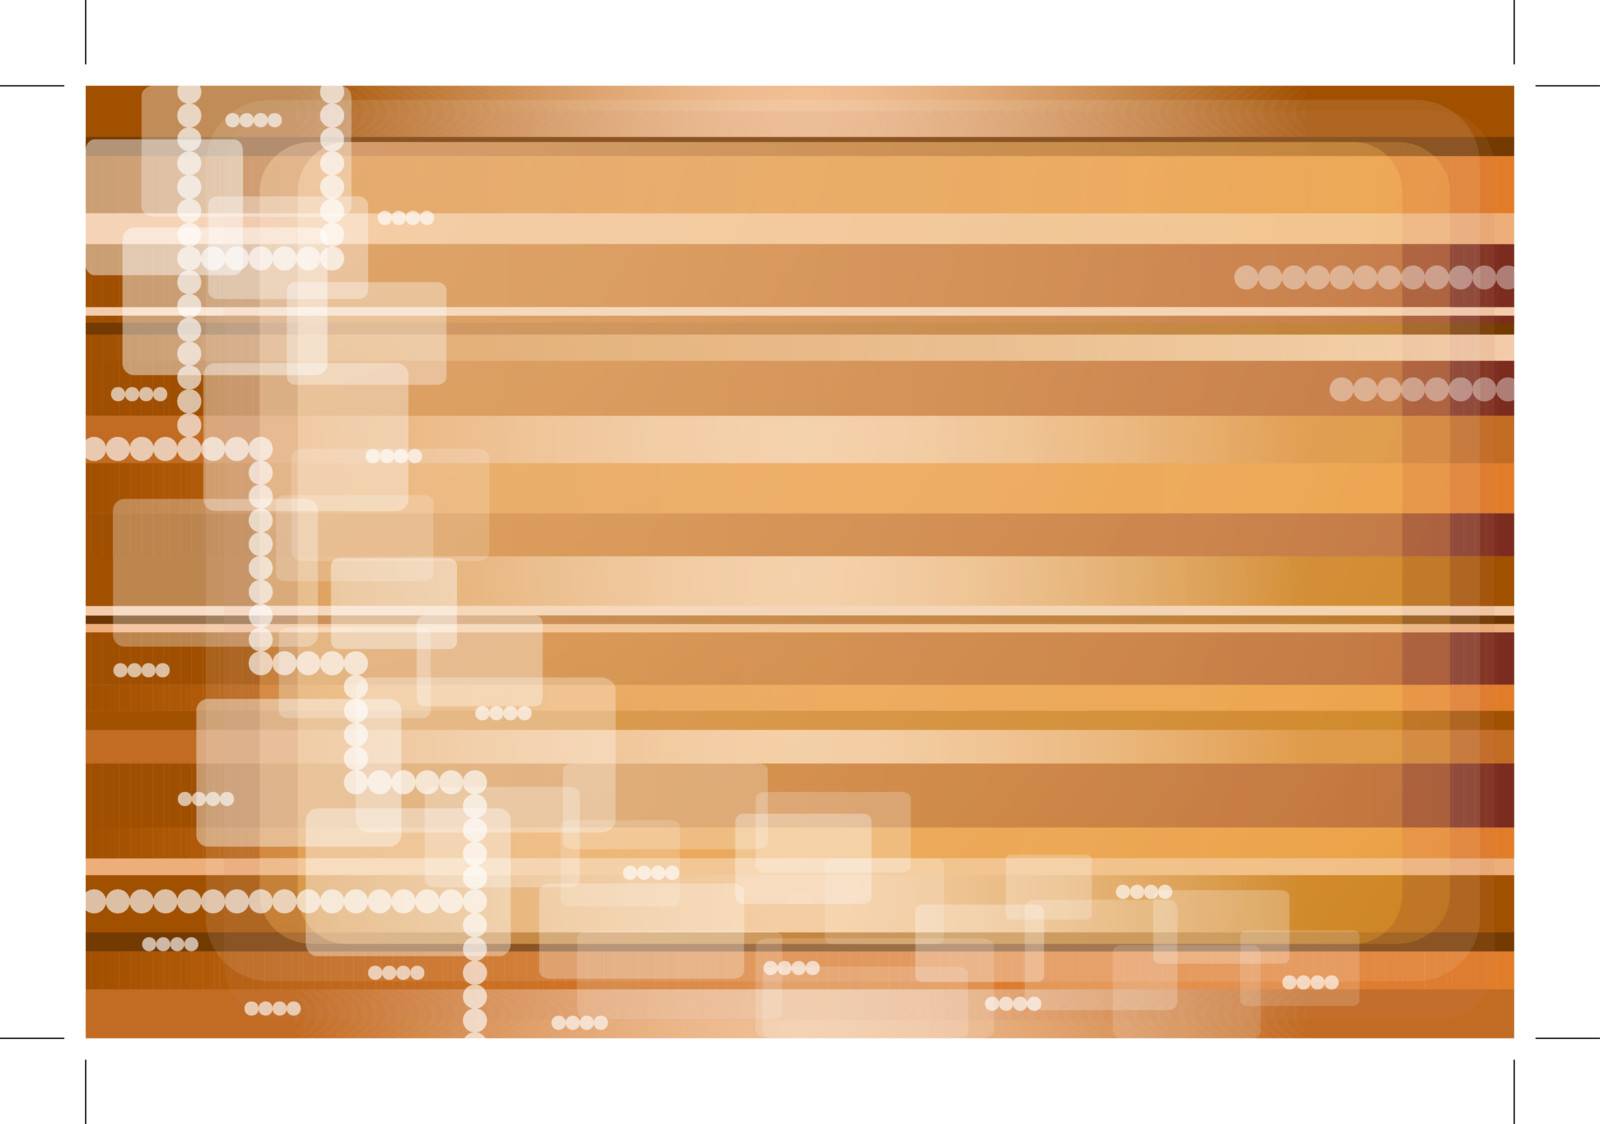 Abstract pattern on a gold and brown striped background with transparent squares and circles. Copy space for text.